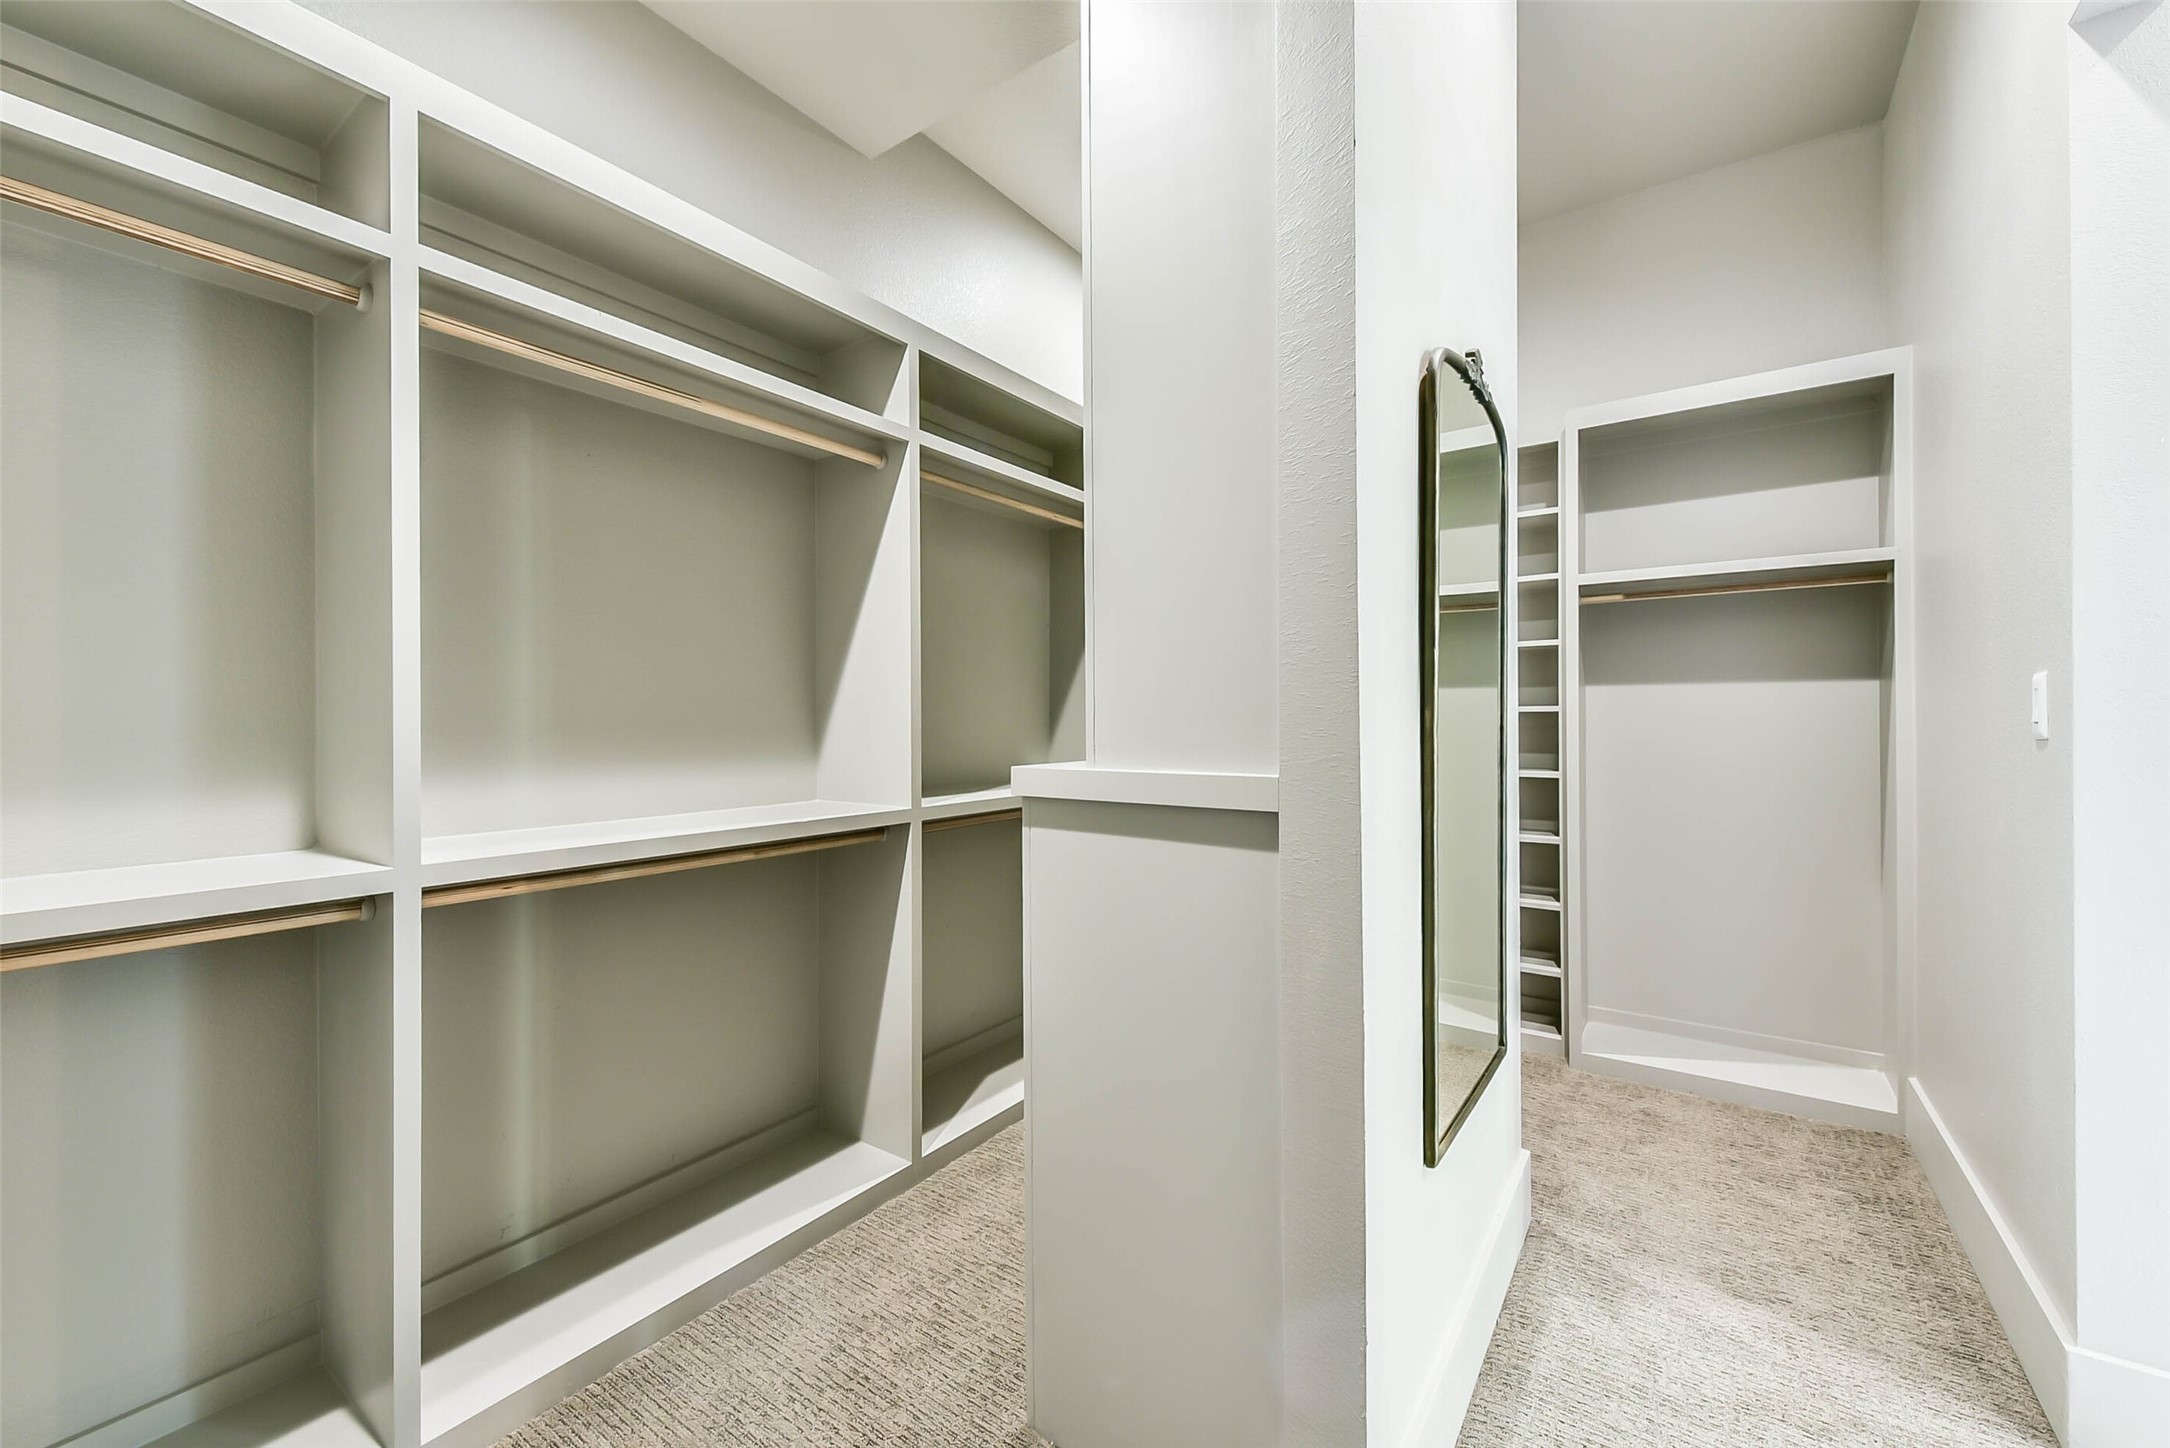 The large walk-in closet provides ample space in the custom built-ins for all of your personal belongings.